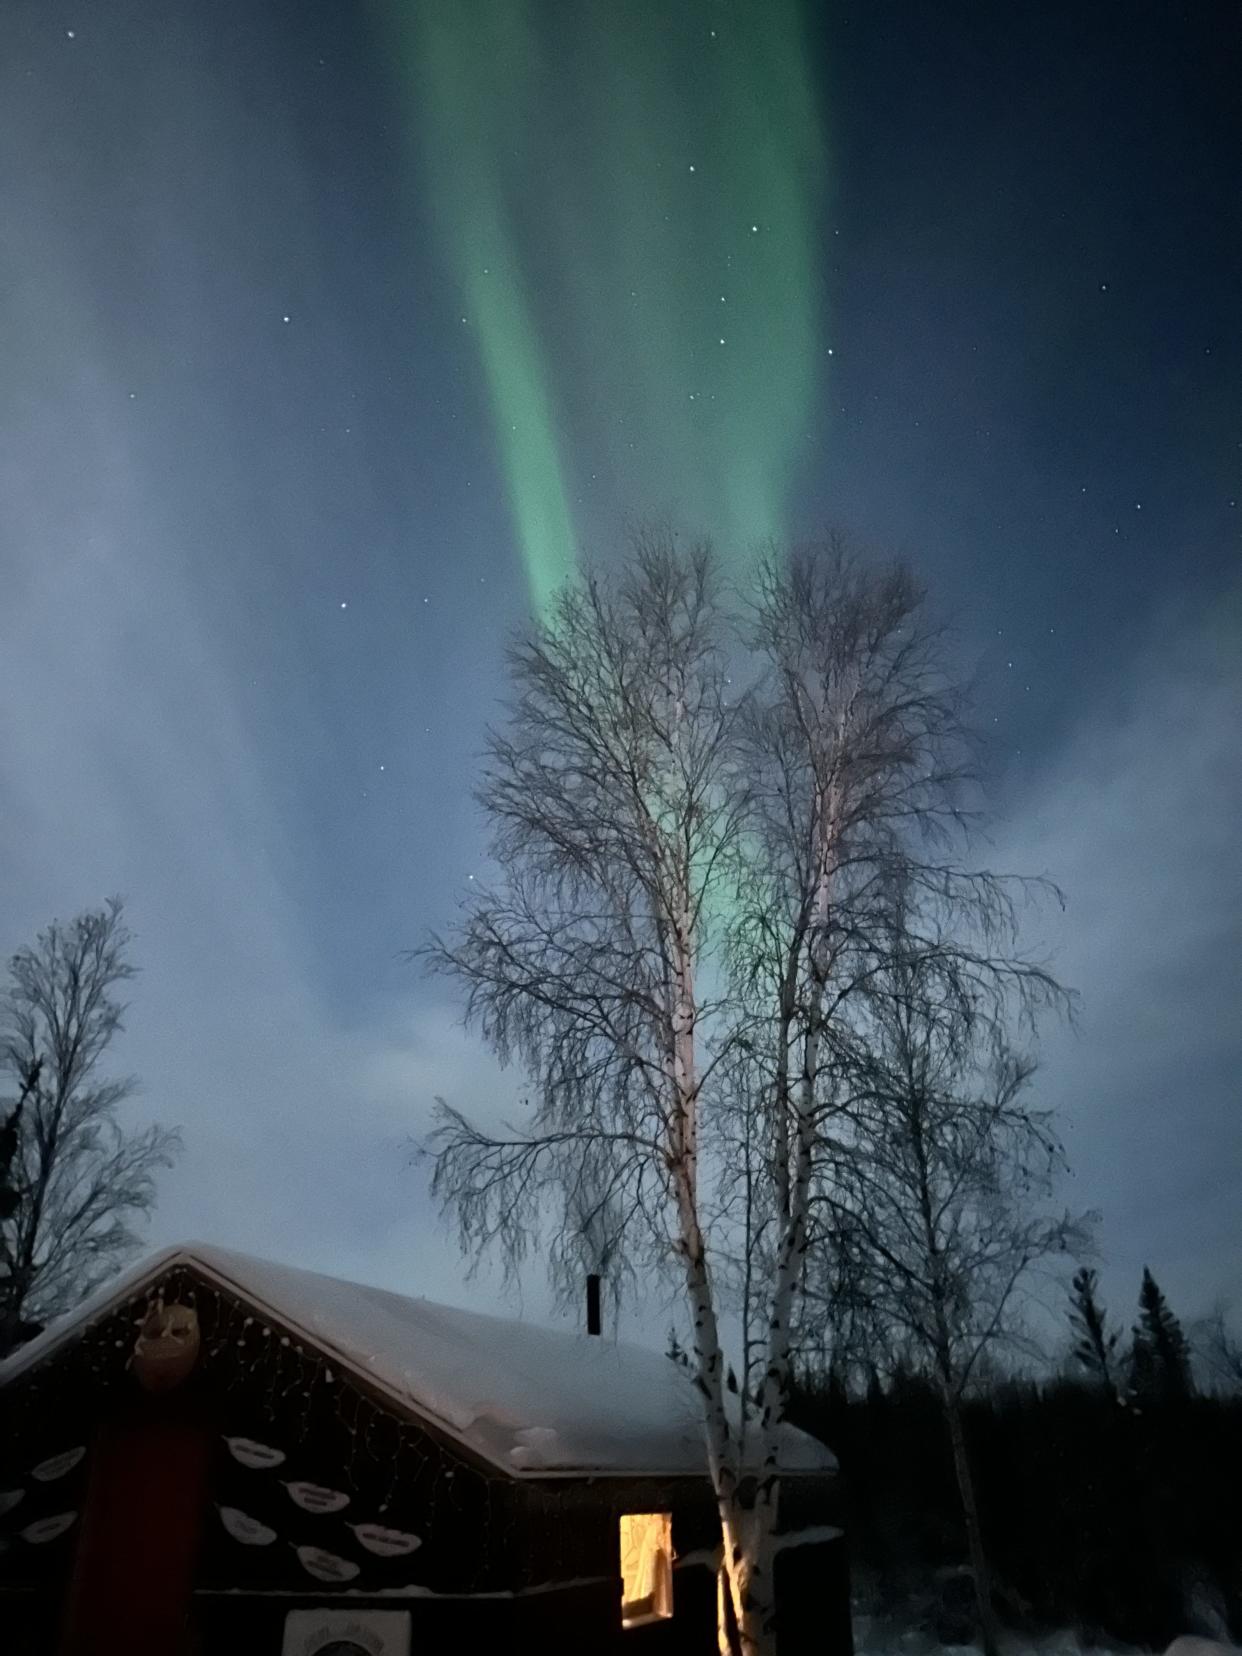 The aurora borealis seen over Tracy Therrien's cabin.